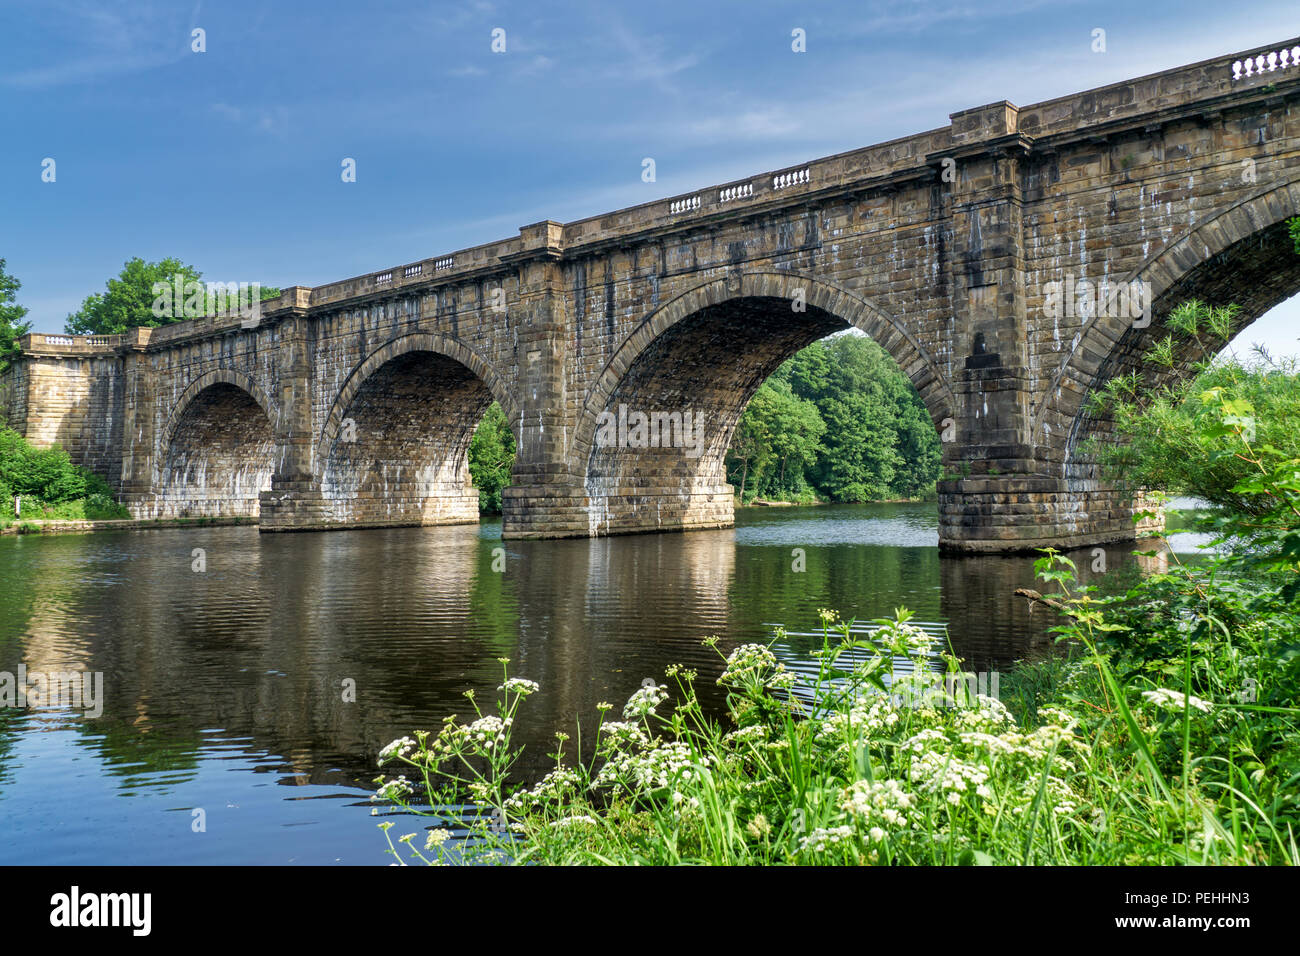 The Lune valley aqueduct, which carries the Lancaster canal over Stock Photo